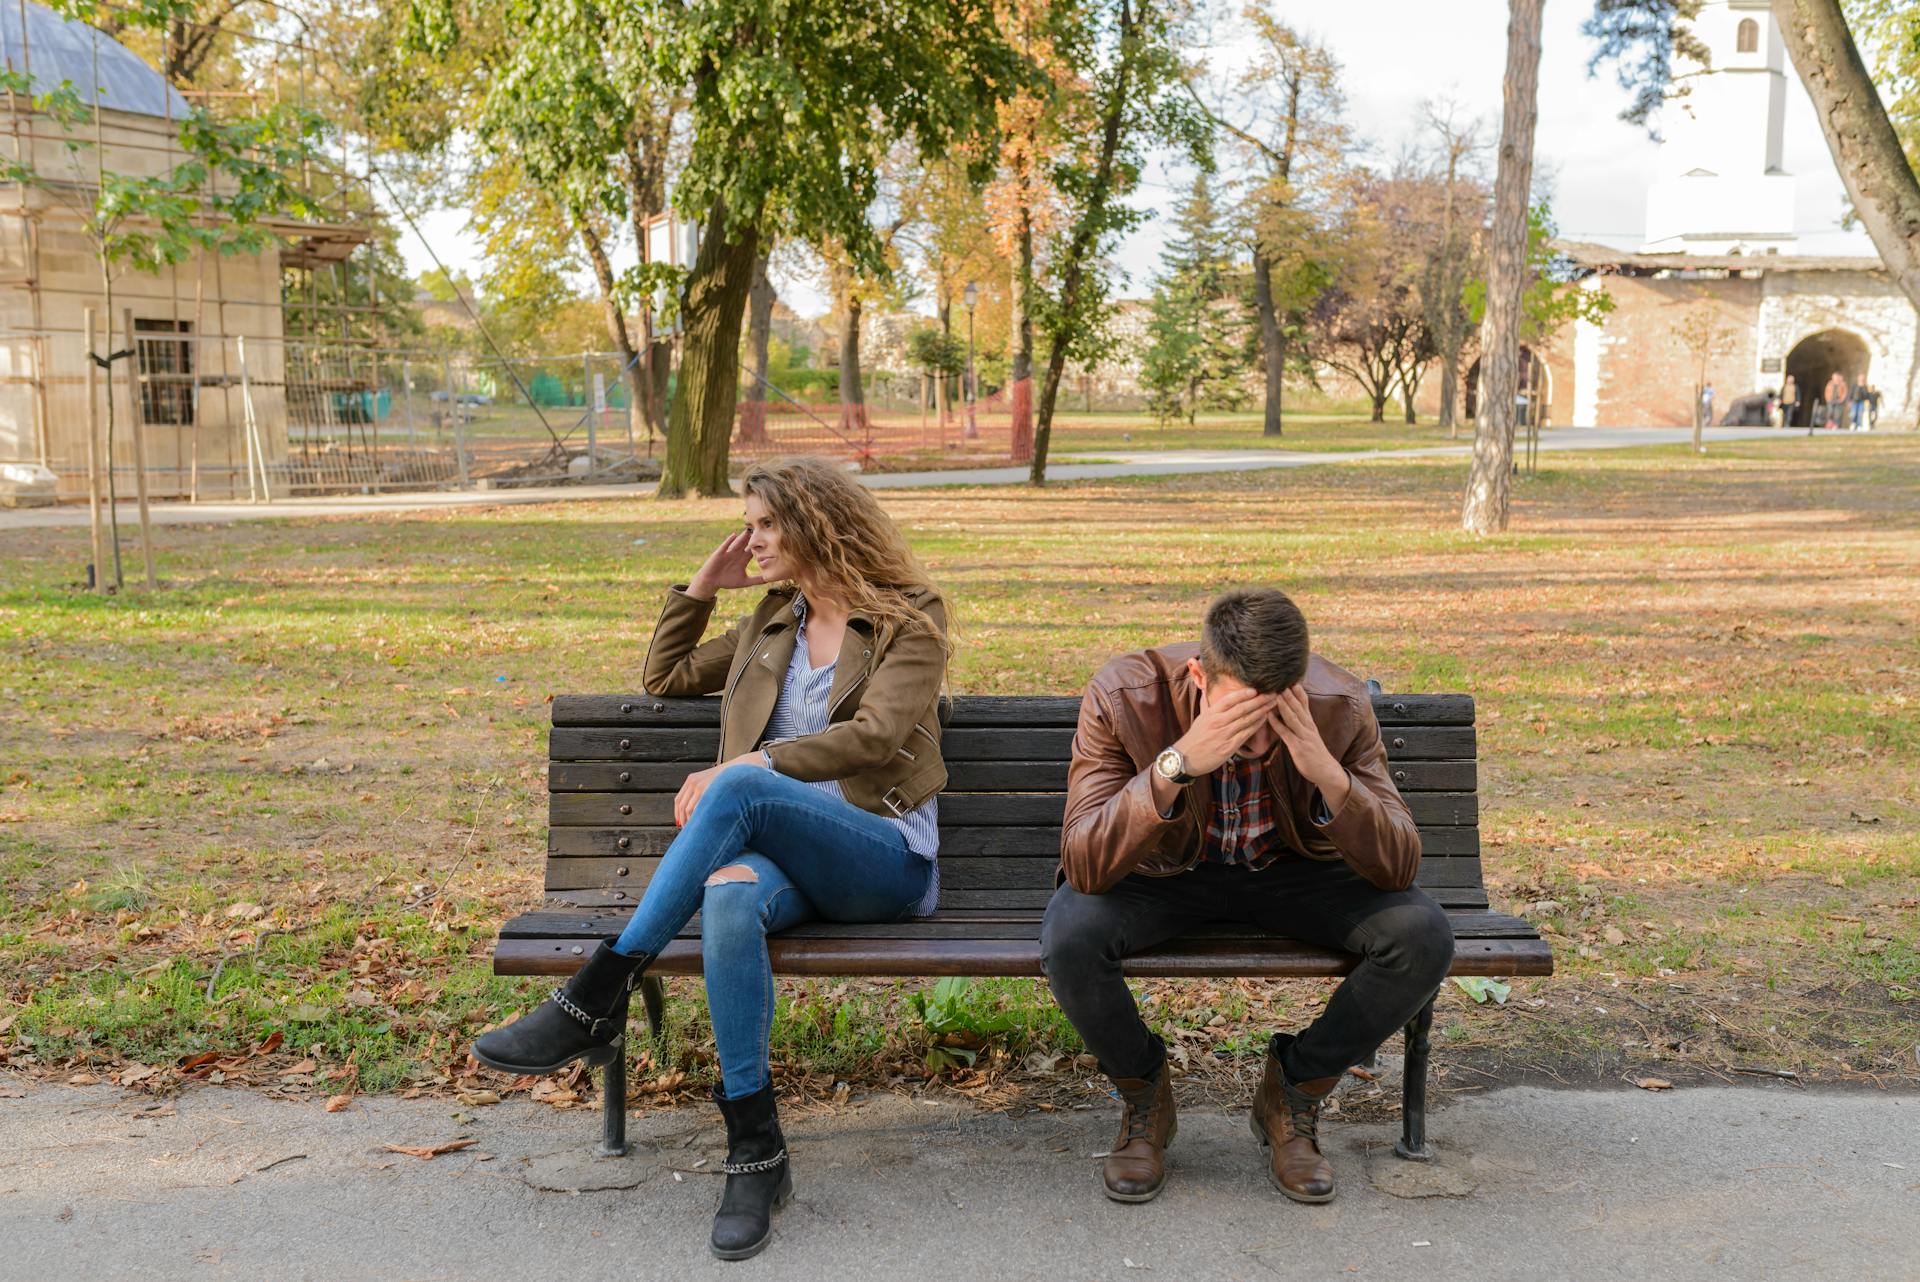 A couple sitting uncomfortably | Source: Pexels